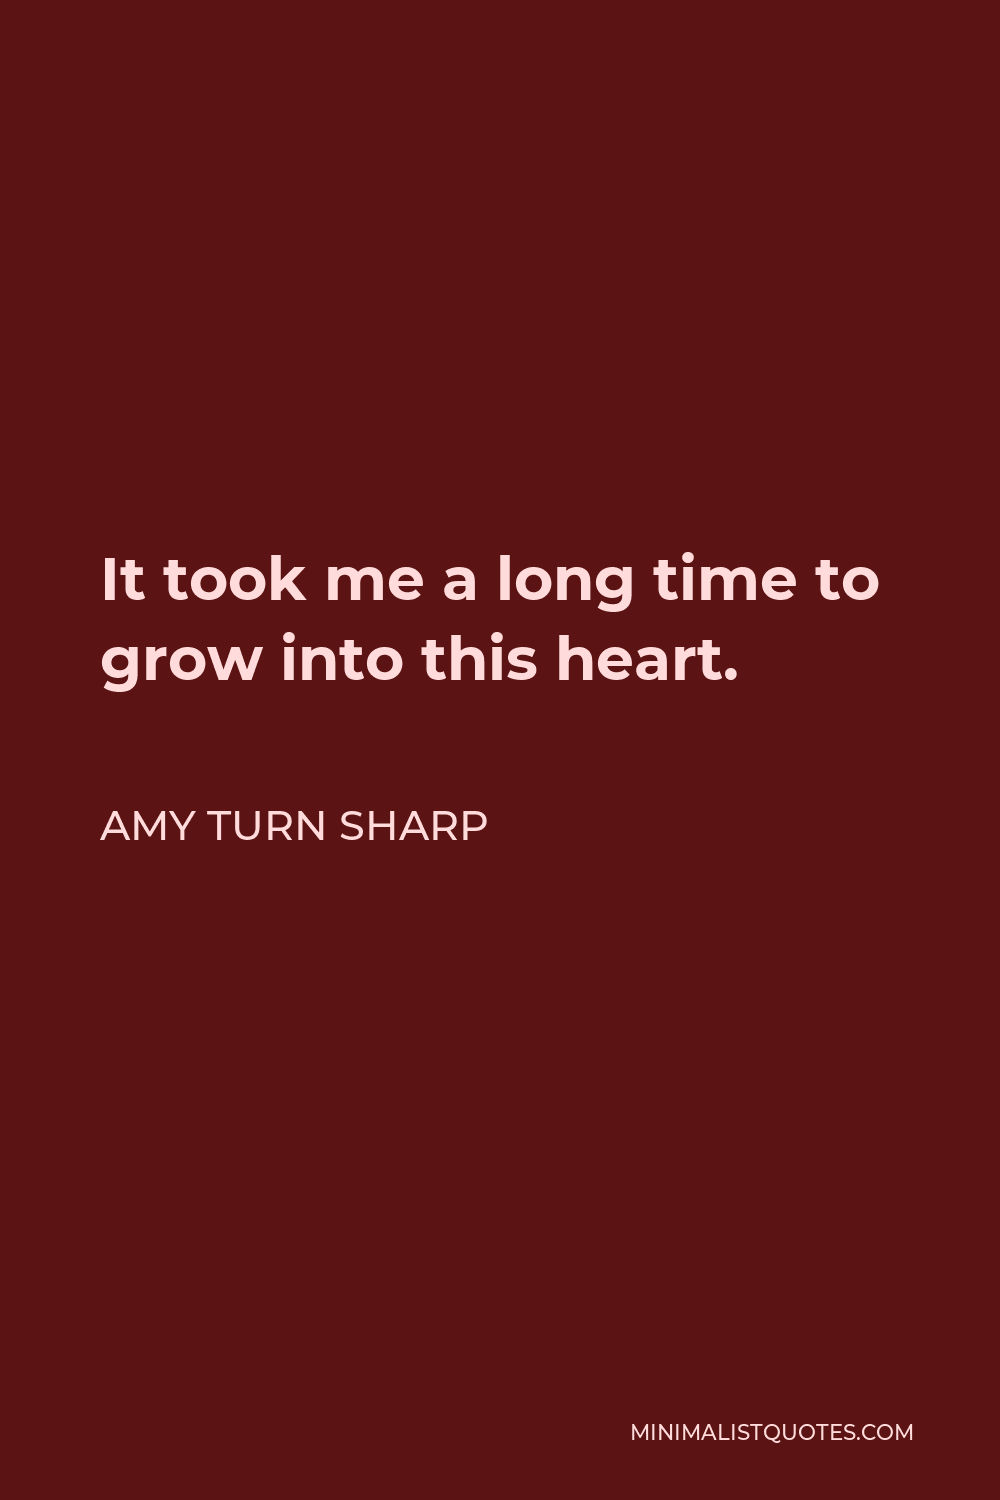 Amy Turn Sharp Quote - It took me a long time to grow into this heart.